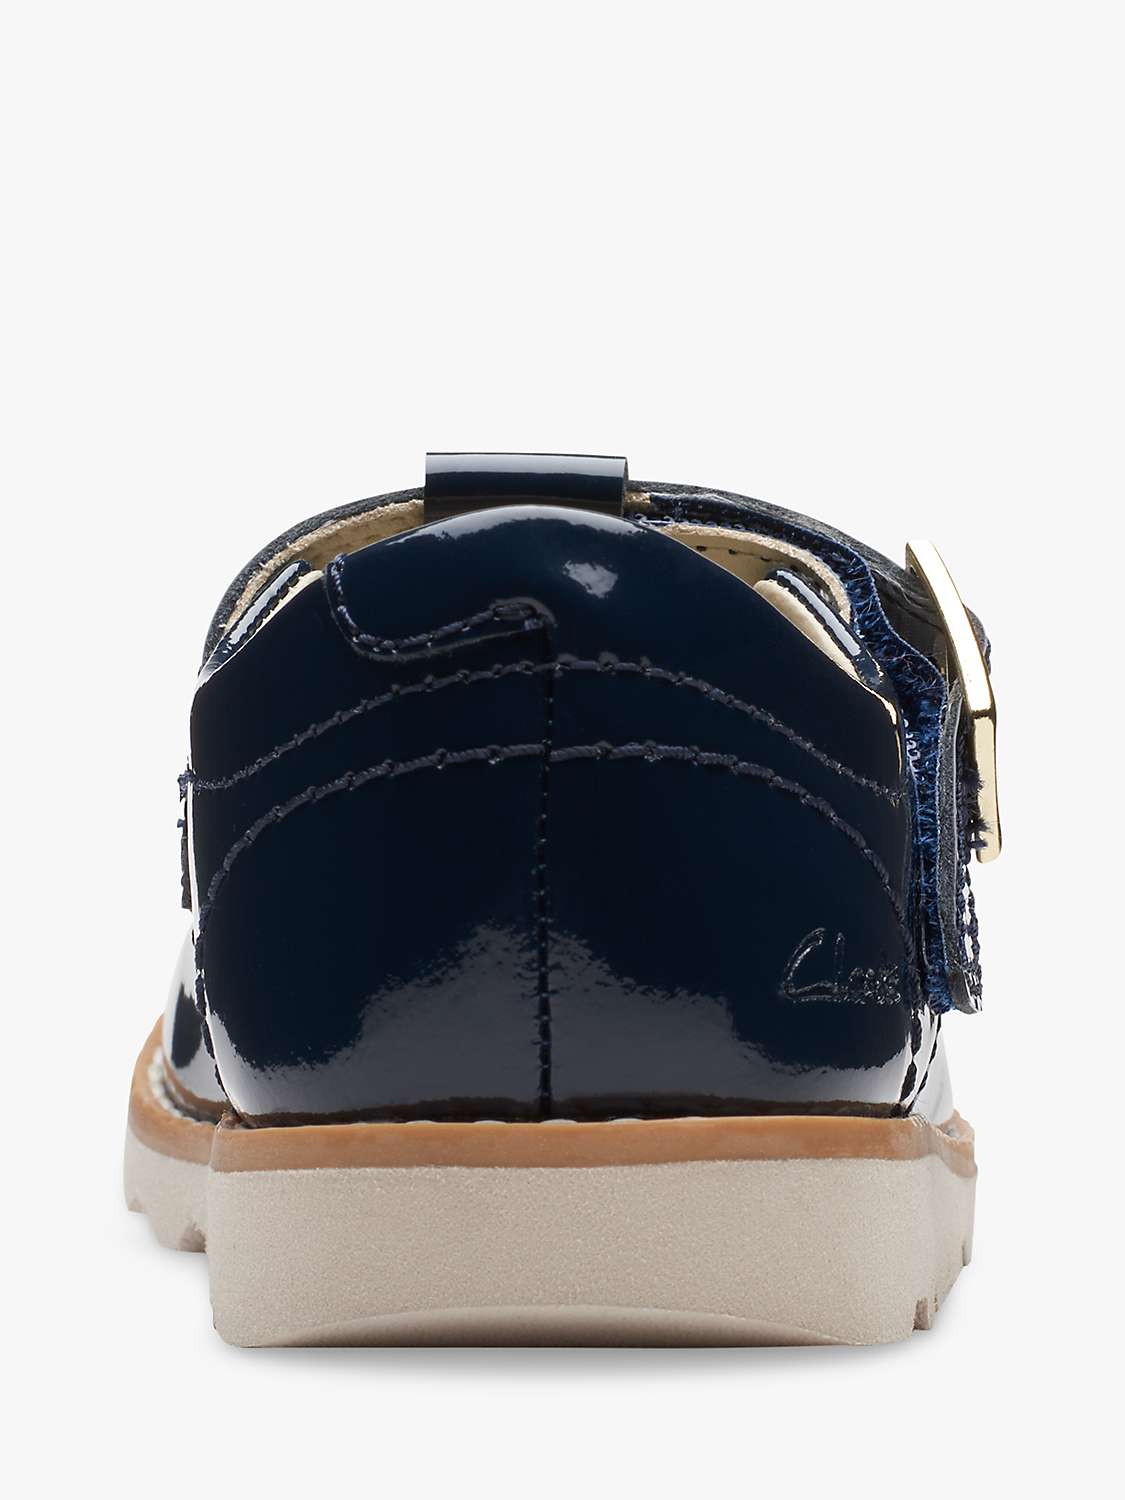 Buy Clarks Kids' Crown Print Leather Patent T-Bar Shoes, Navy Online at johnlewis.com